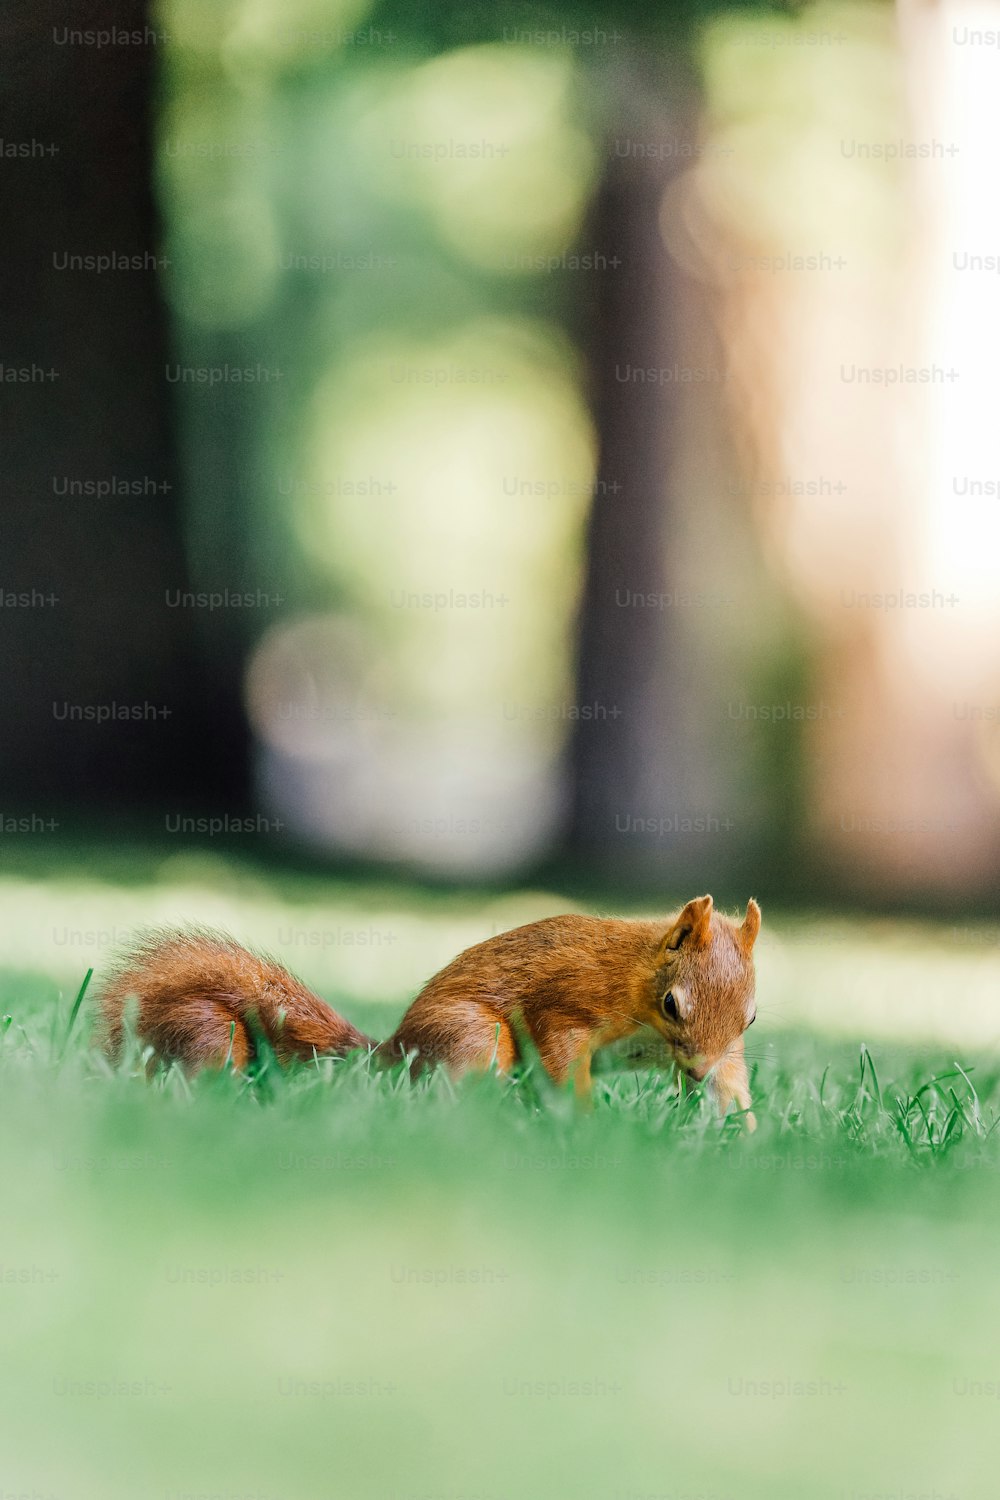 a small squirrel sitting on top of a lush green field